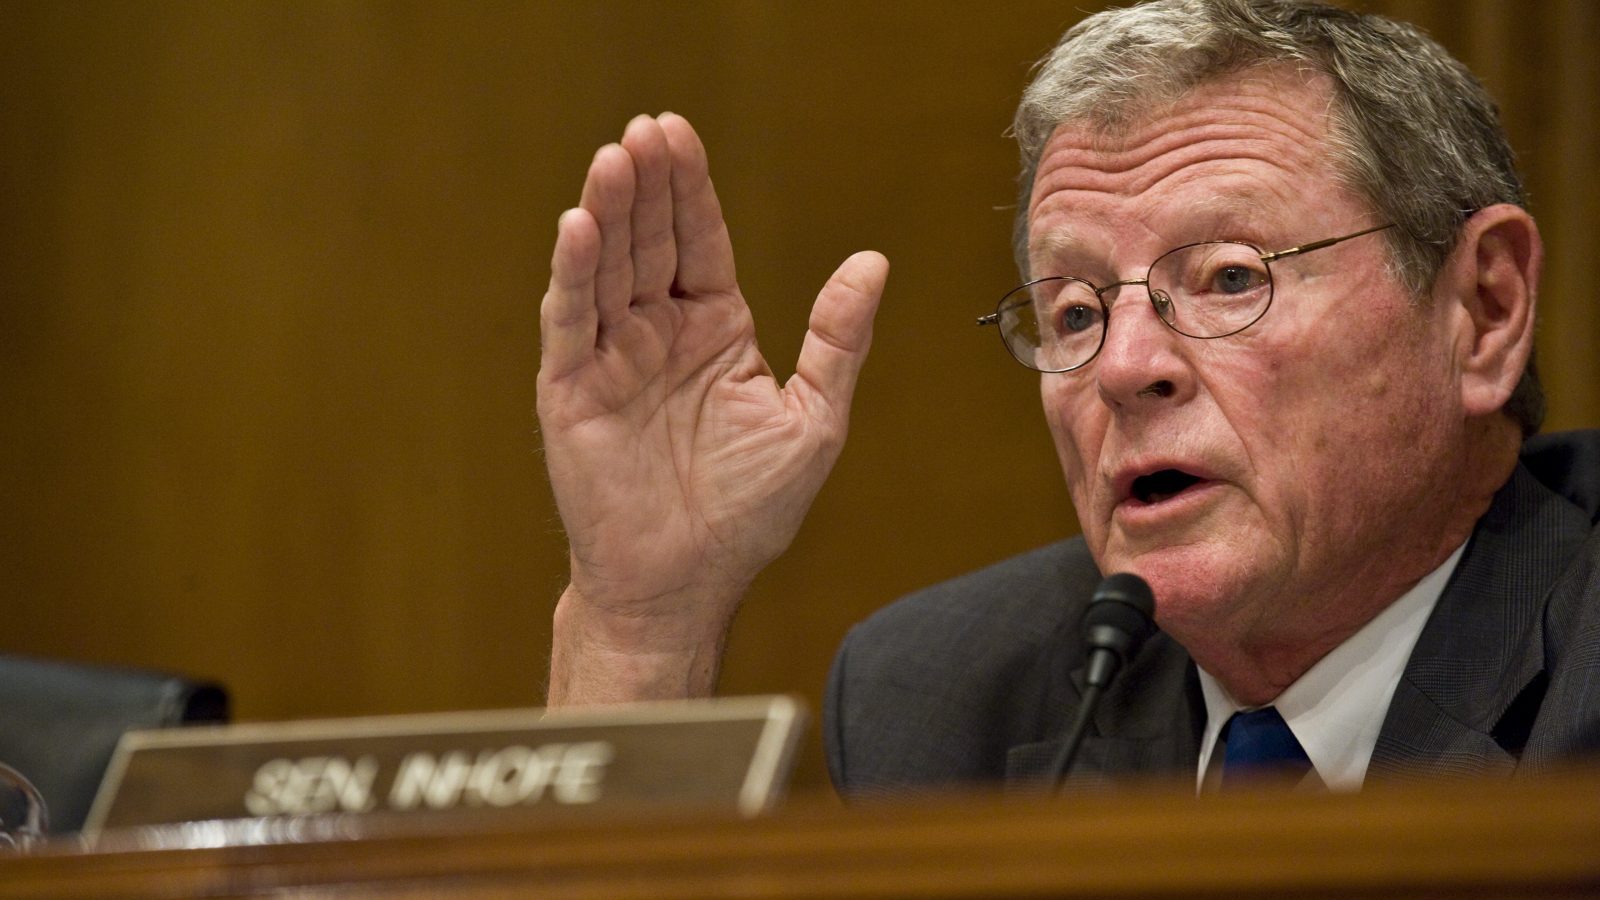 A photo fo James Inhofe with his hand in the air